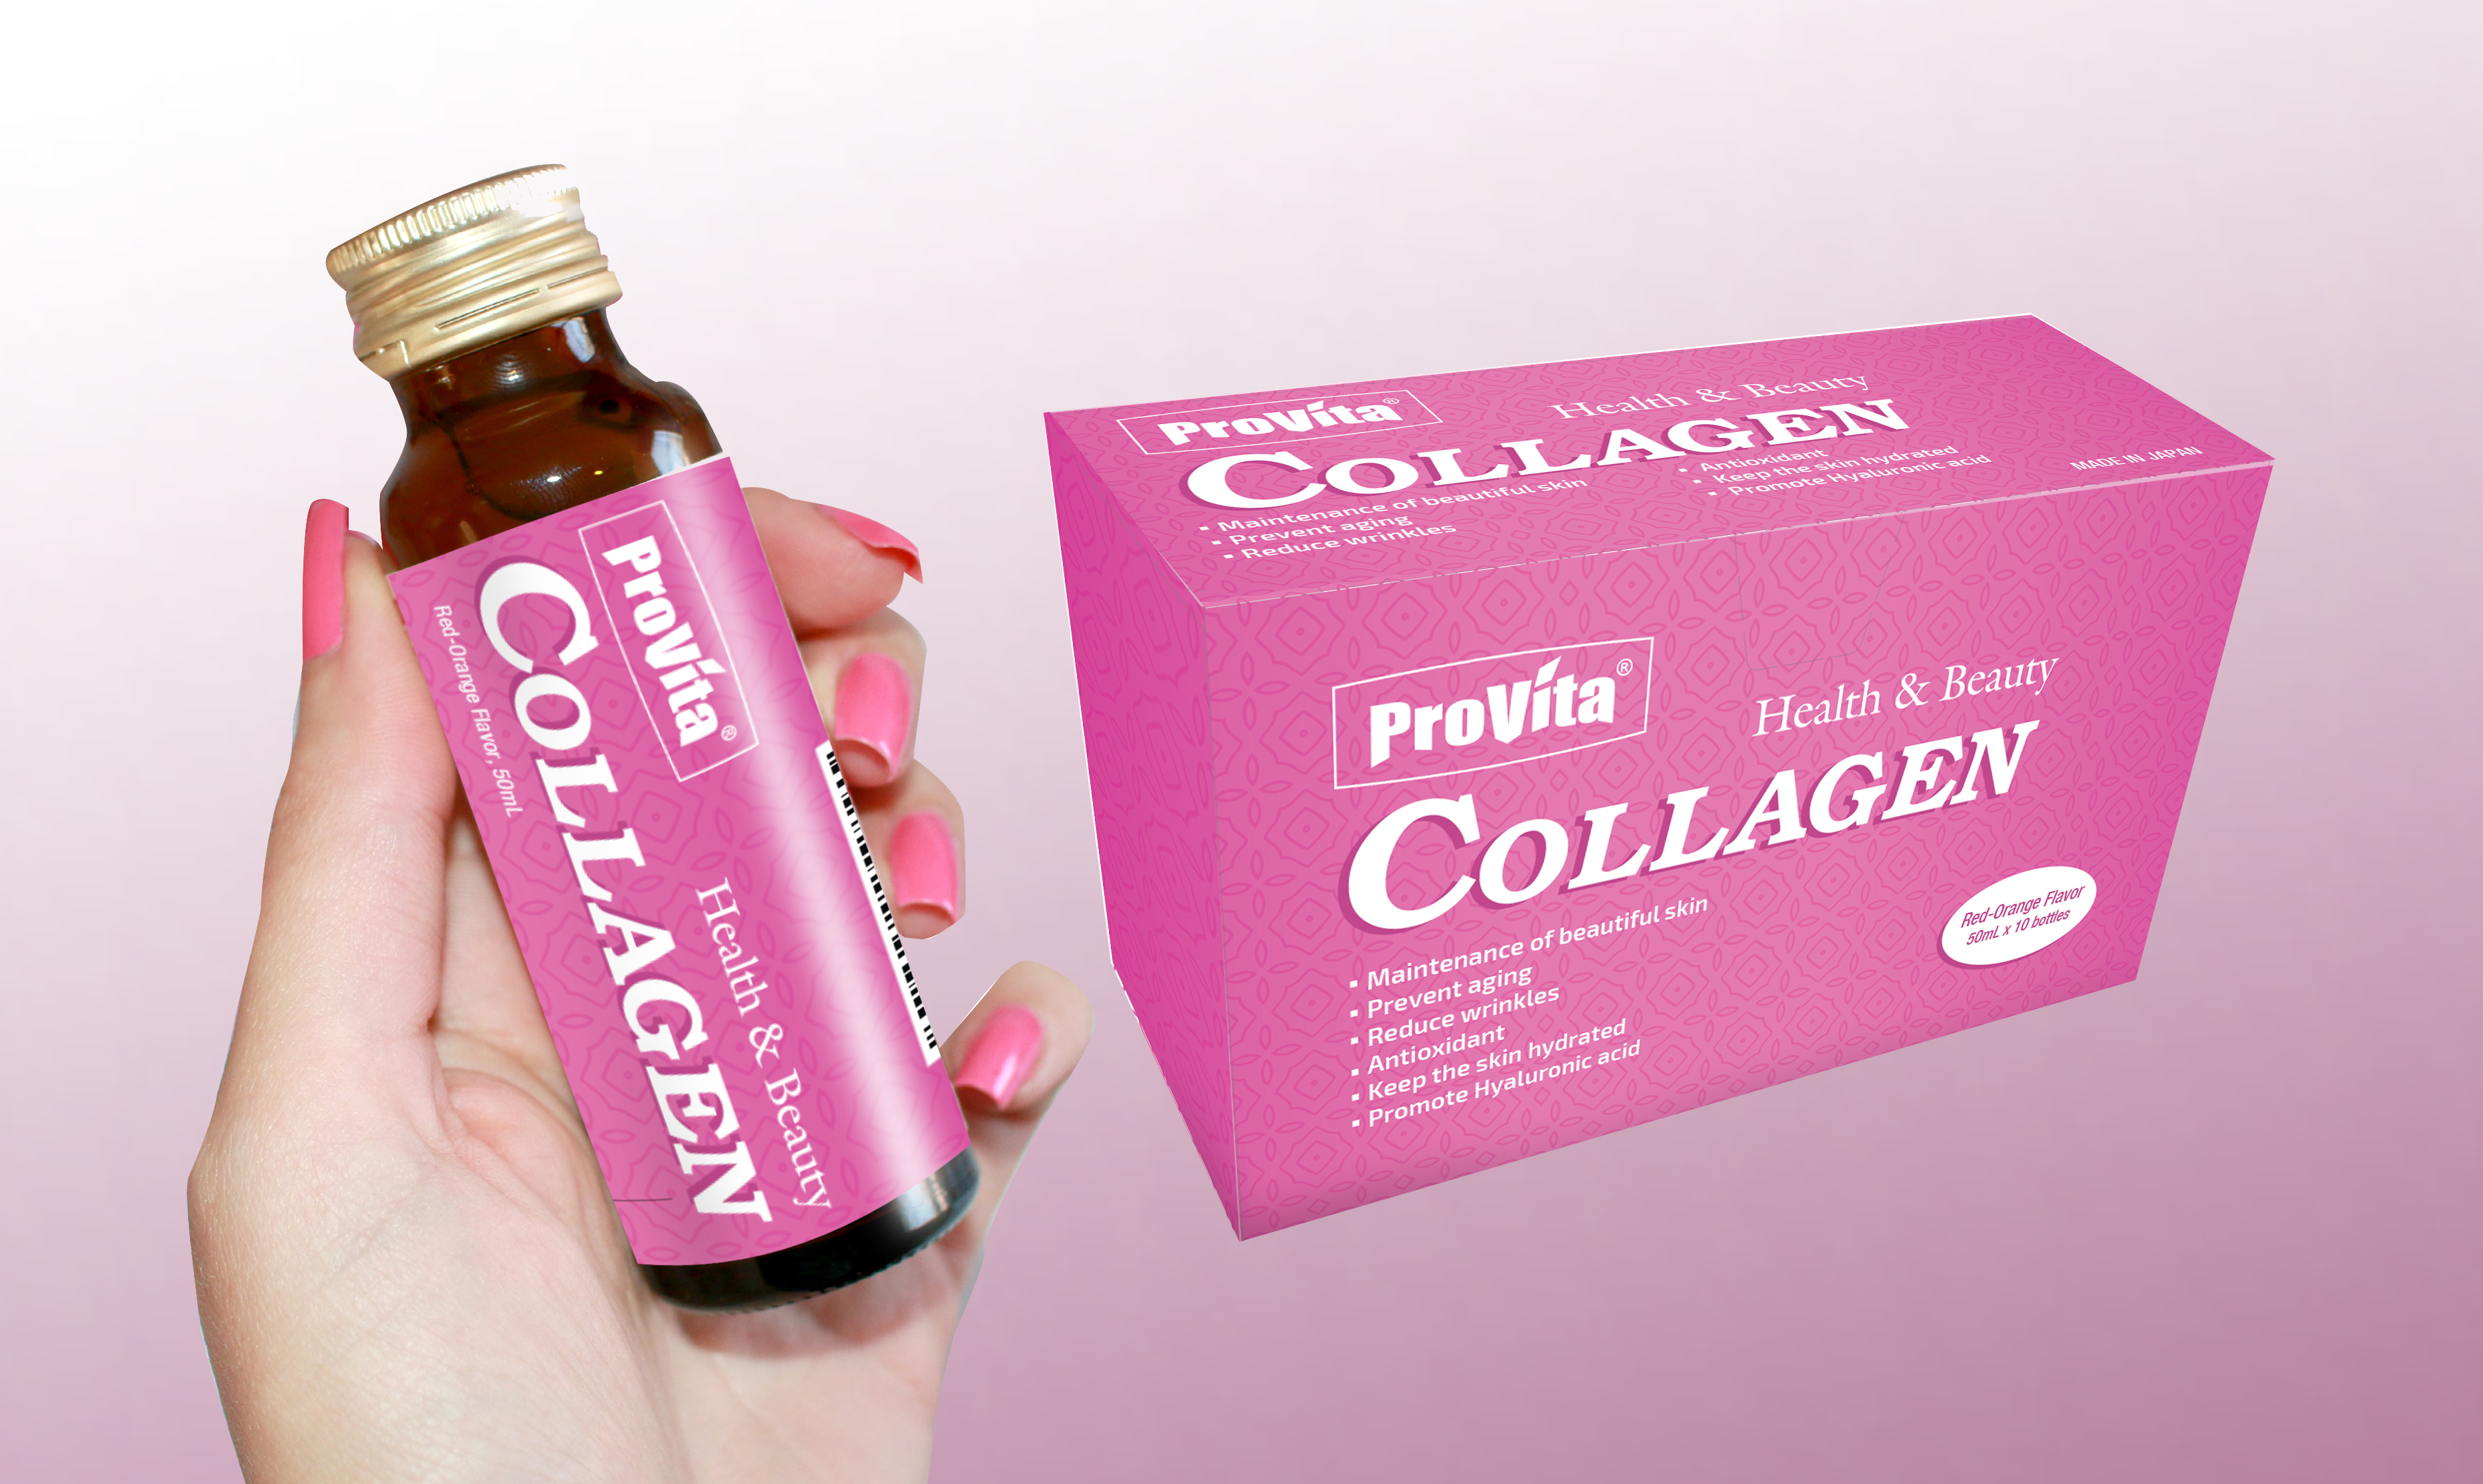 PROVITA COLLAGEN IS A NATURAL TREATMENT TO YOUR SKIN AND BODY - Health and Beauty Collagen